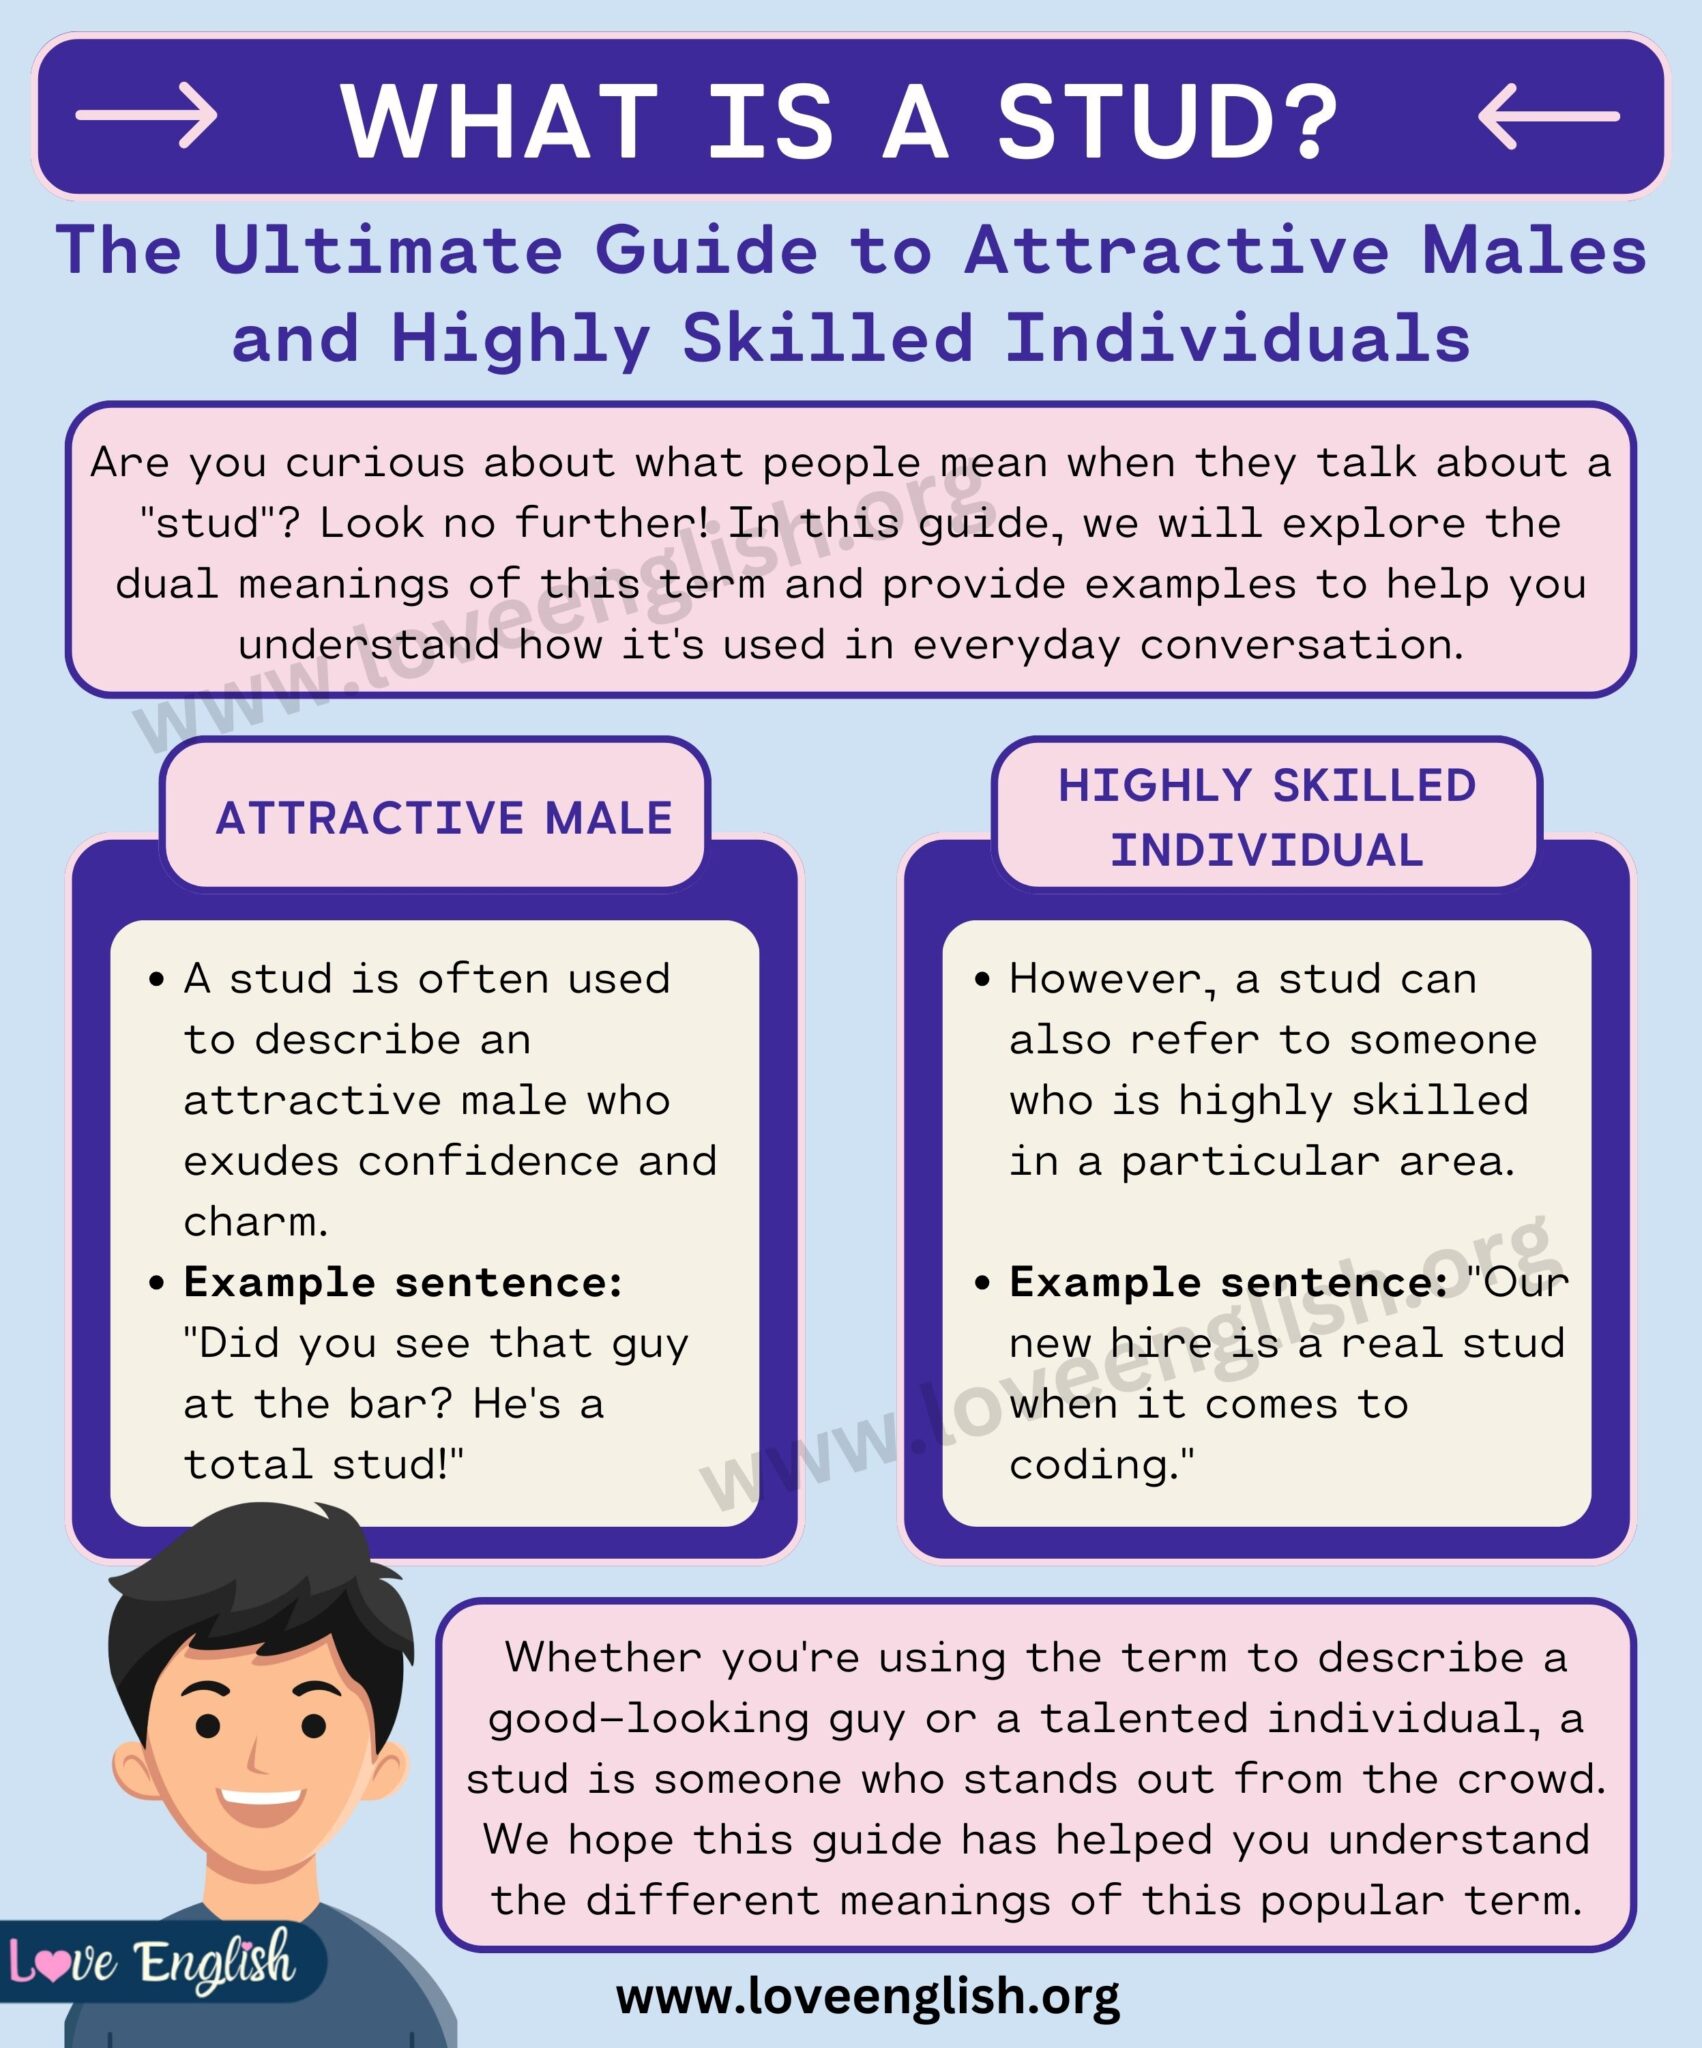 What Is A Stud? The Ultimate Guide To Understanding Attractive Men